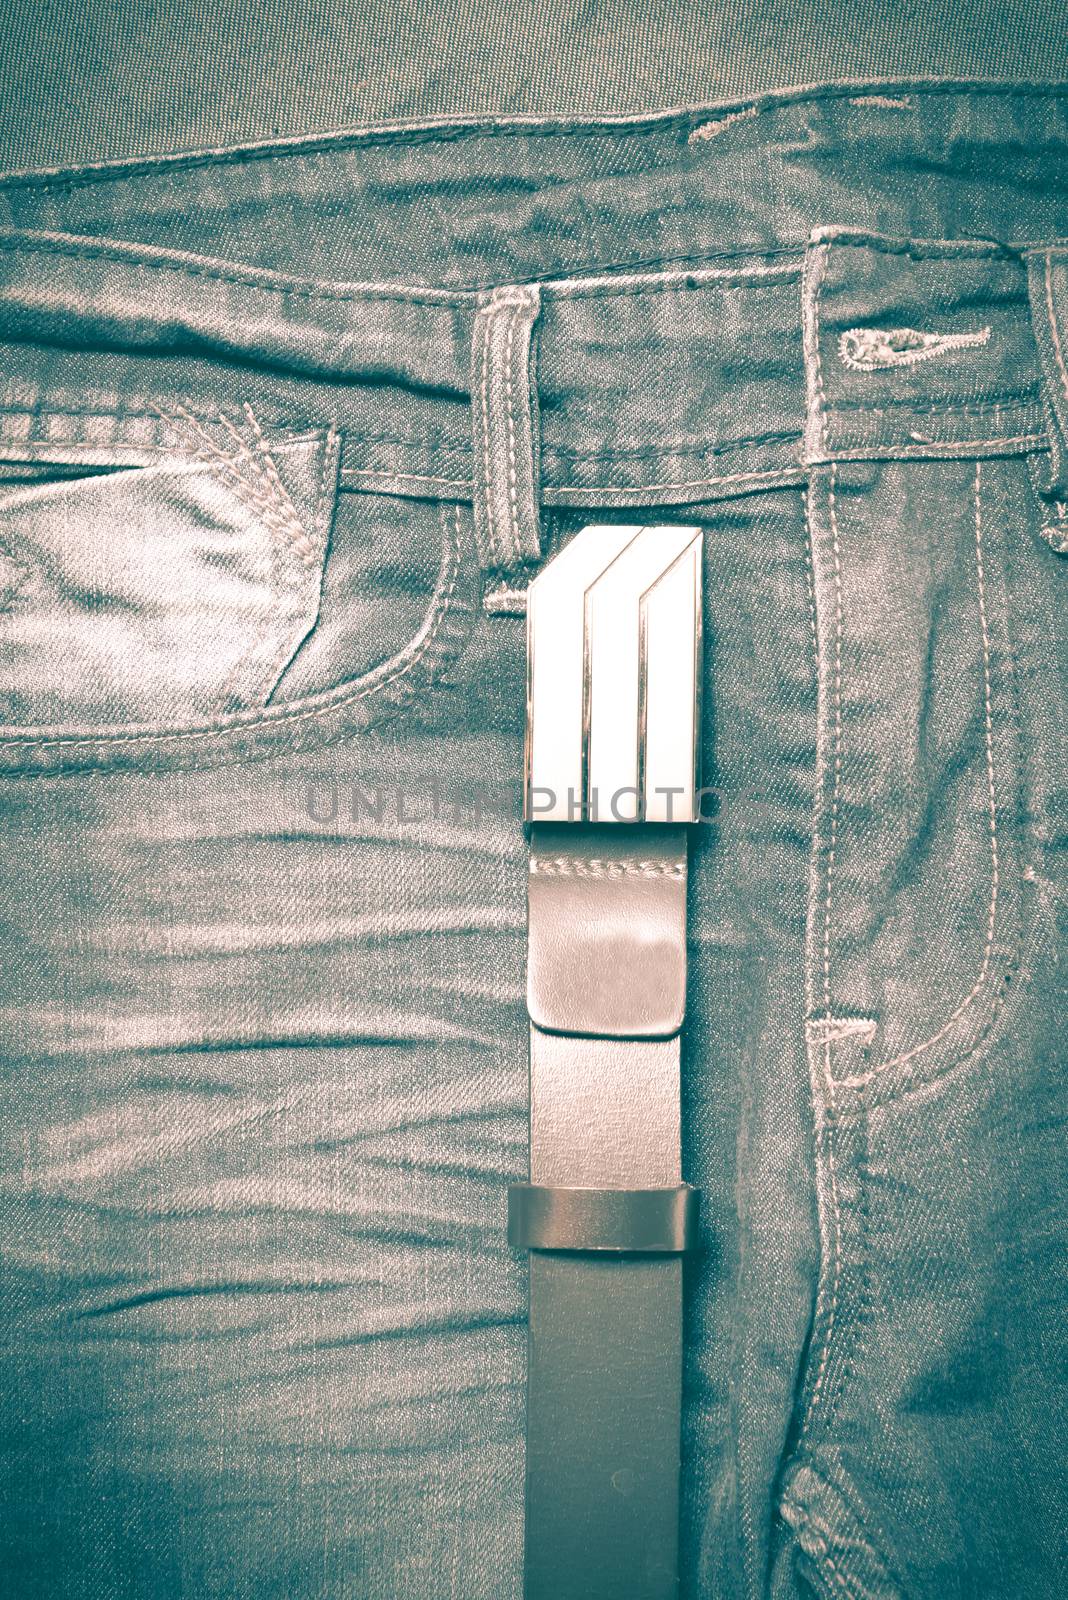 jean and leather belt by ammza12